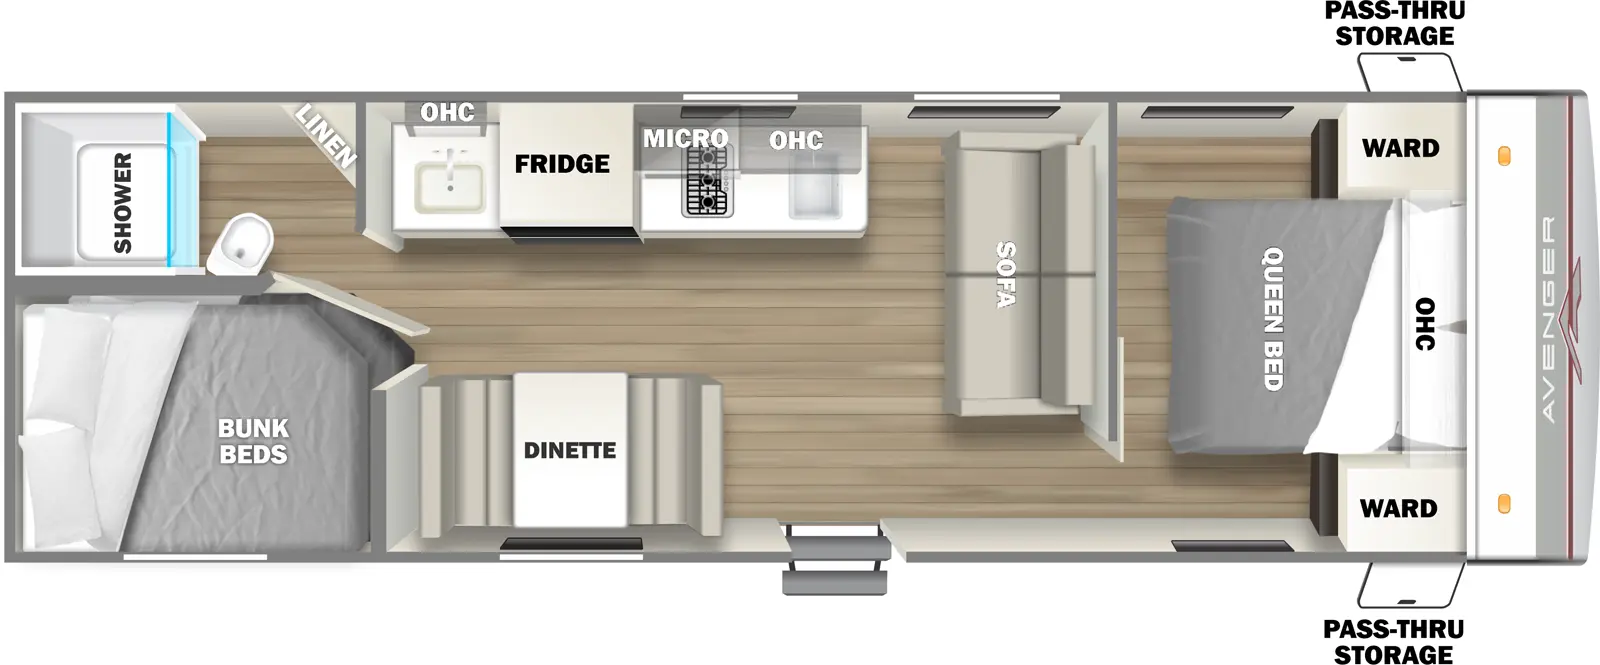 The 25BH has zero slideouts and one entry. Exterior features a front pass-thru storage. Interior layout front to back: foot-facing queen bed with overhead cabinet and wardrobes on each side; sofa along inner wall; off-door side kitchen counter with sink, overhead cabinet, microwave, cooktop, and refrigerator; door side entry, and dinette; rear off-door side sink with medicine cabinet outside bathroom with shower, toilet and linen closet only; rear door side bunk beds.